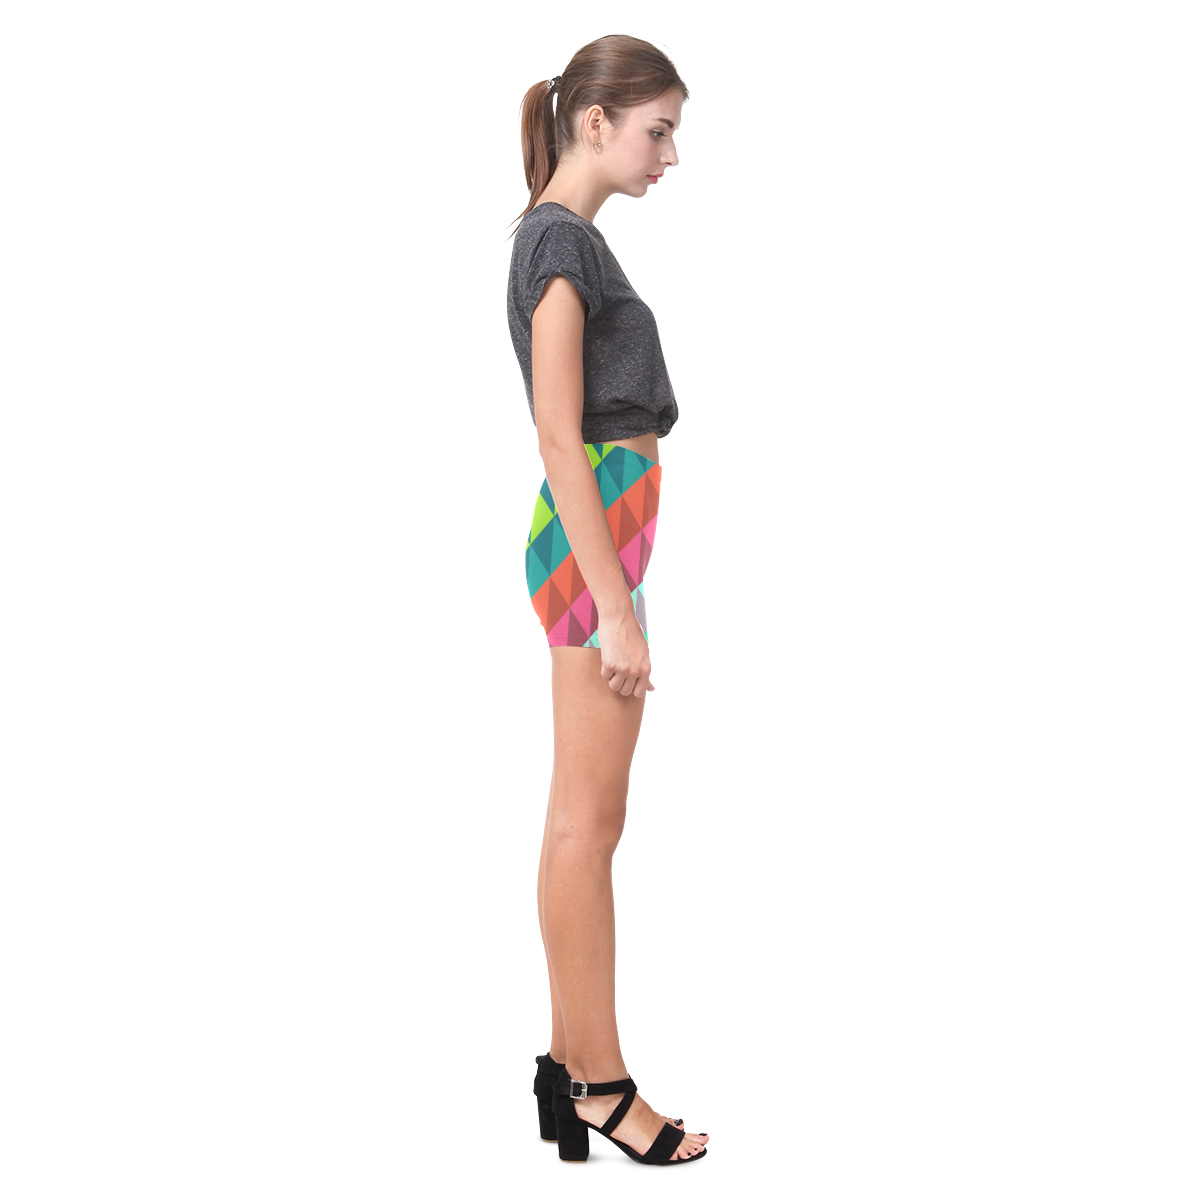 Cool Colorful Geometric Abstract Pattern Briseis Skinny Shorts (Model L04)